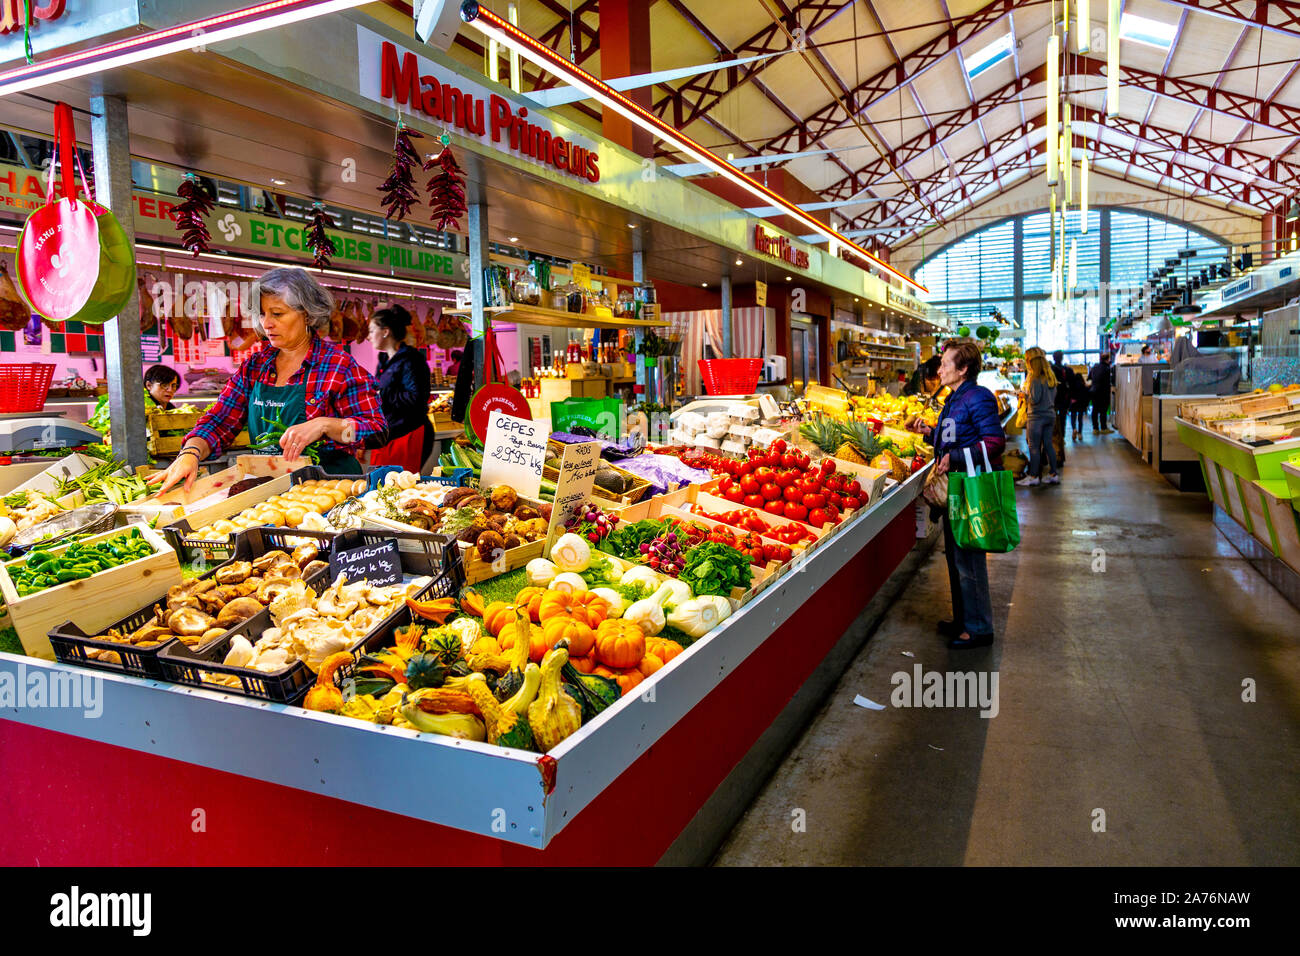 Fruit and vegetable stall at Mercado Les Halles, Biarritz, France Stock Photo